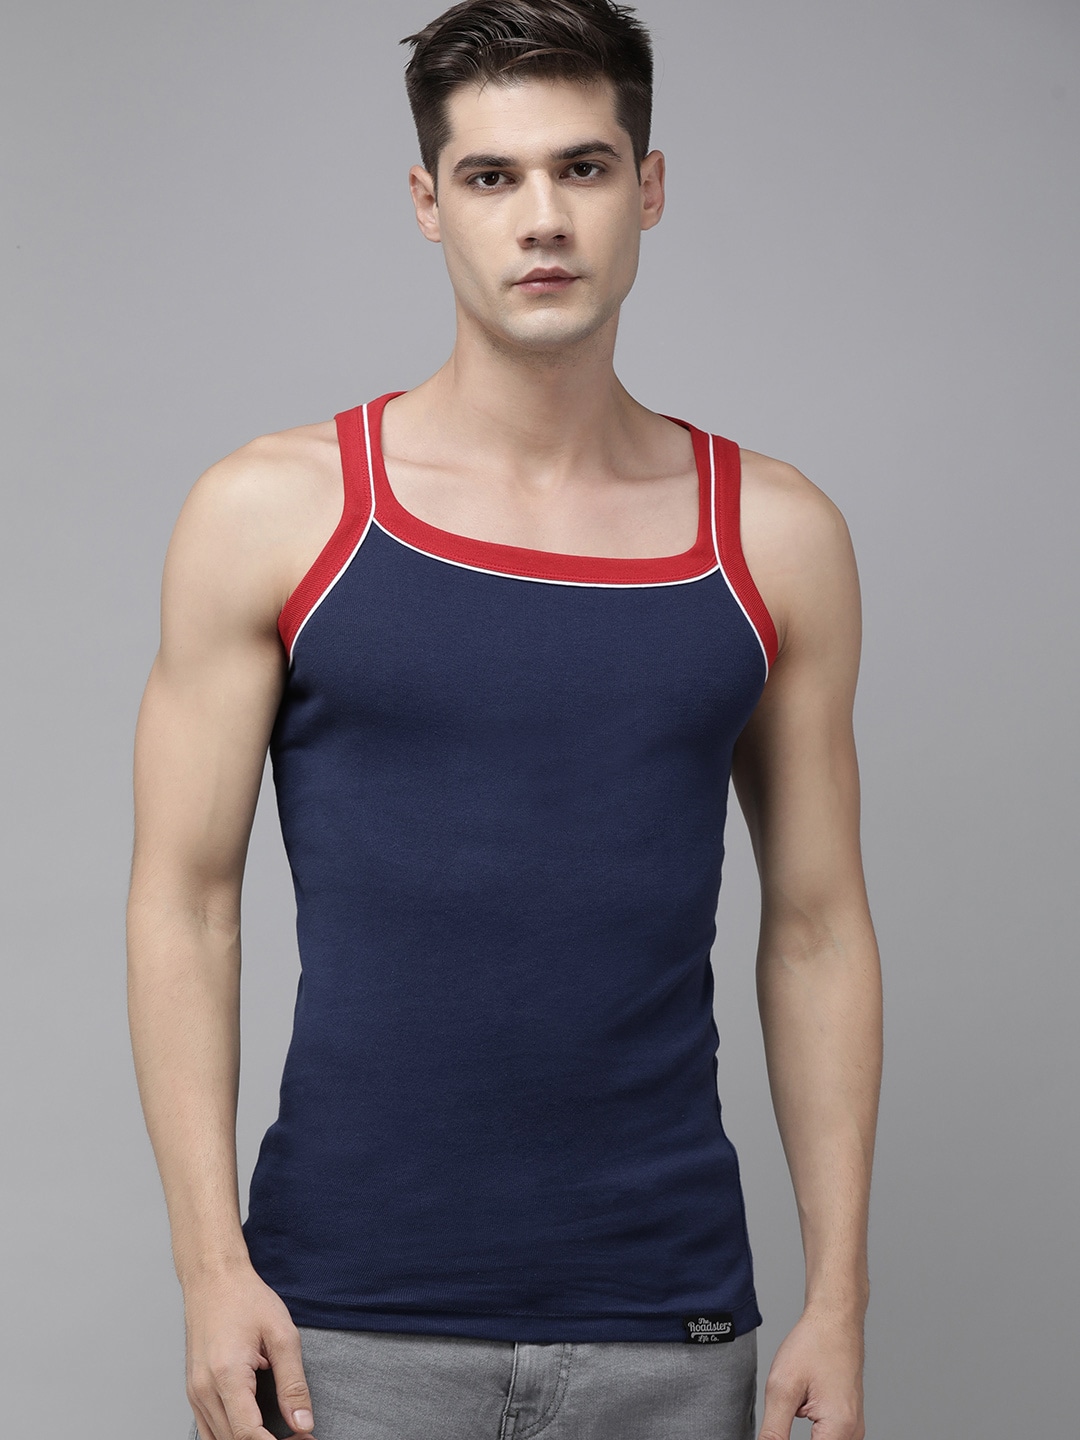 Clothing Innerwear Vests | Roadster Men Pack of 2 Solid Pure Cotton Innerwear Vests - NV76030